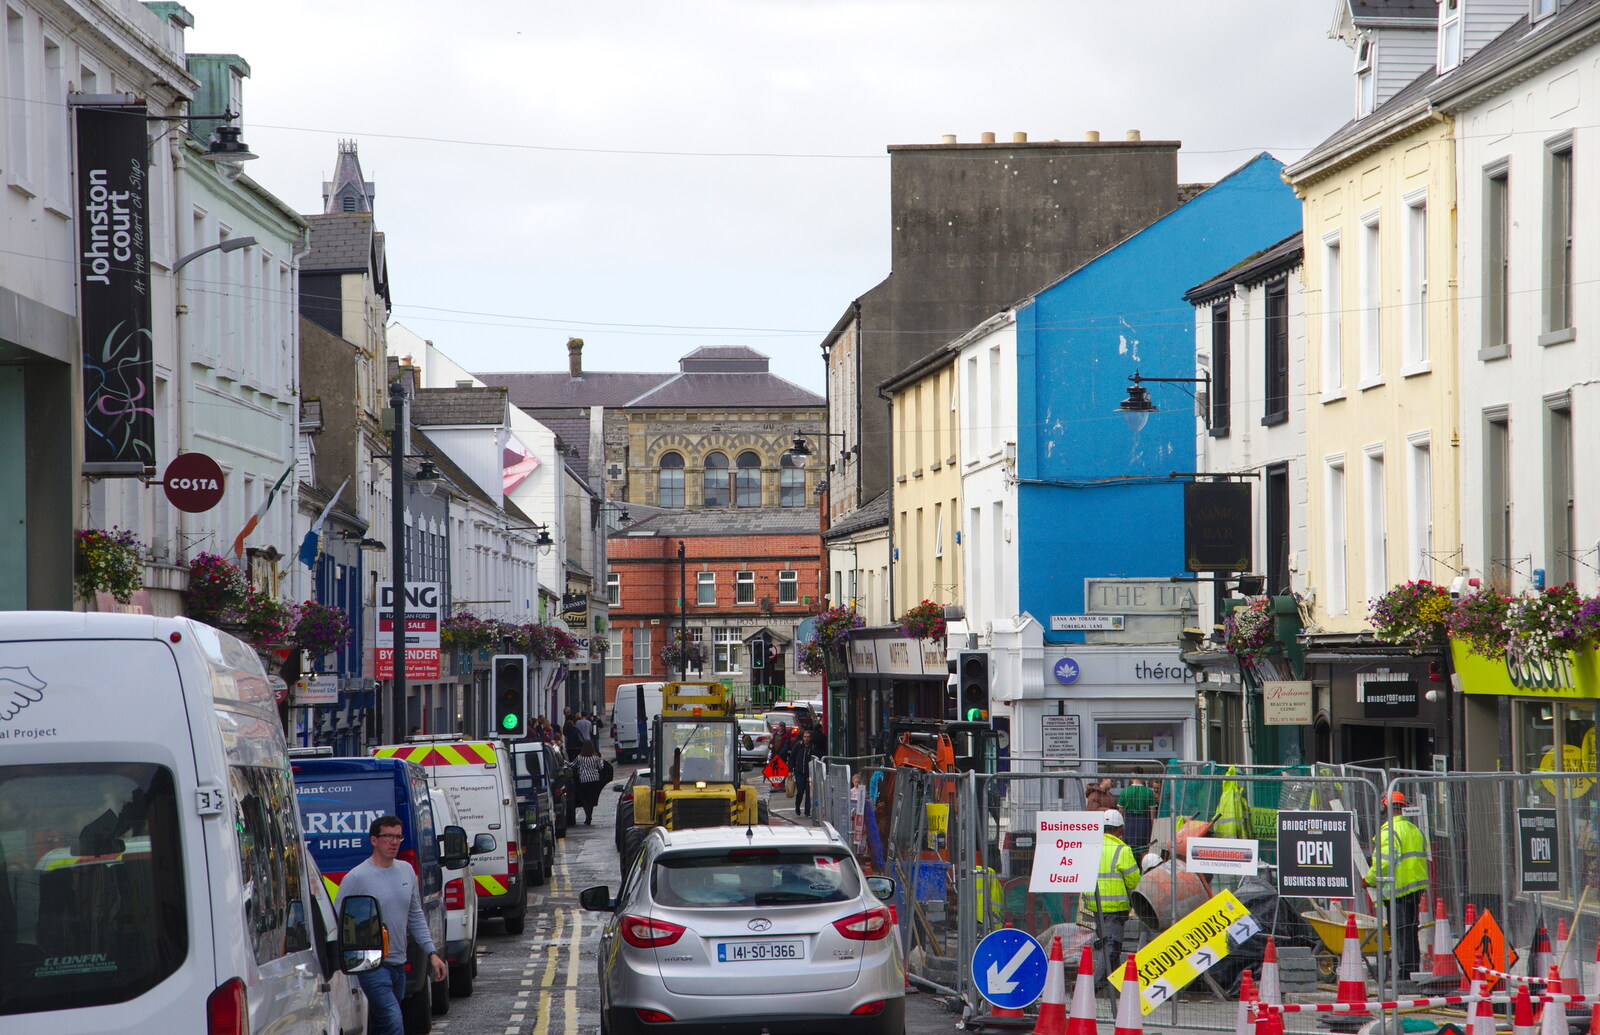 It's hectic on O'Connell Street, Sligo from Florence Court and a Postcard from Sligo, Fermanagh and Sligo, Ireland - 21st August 2019